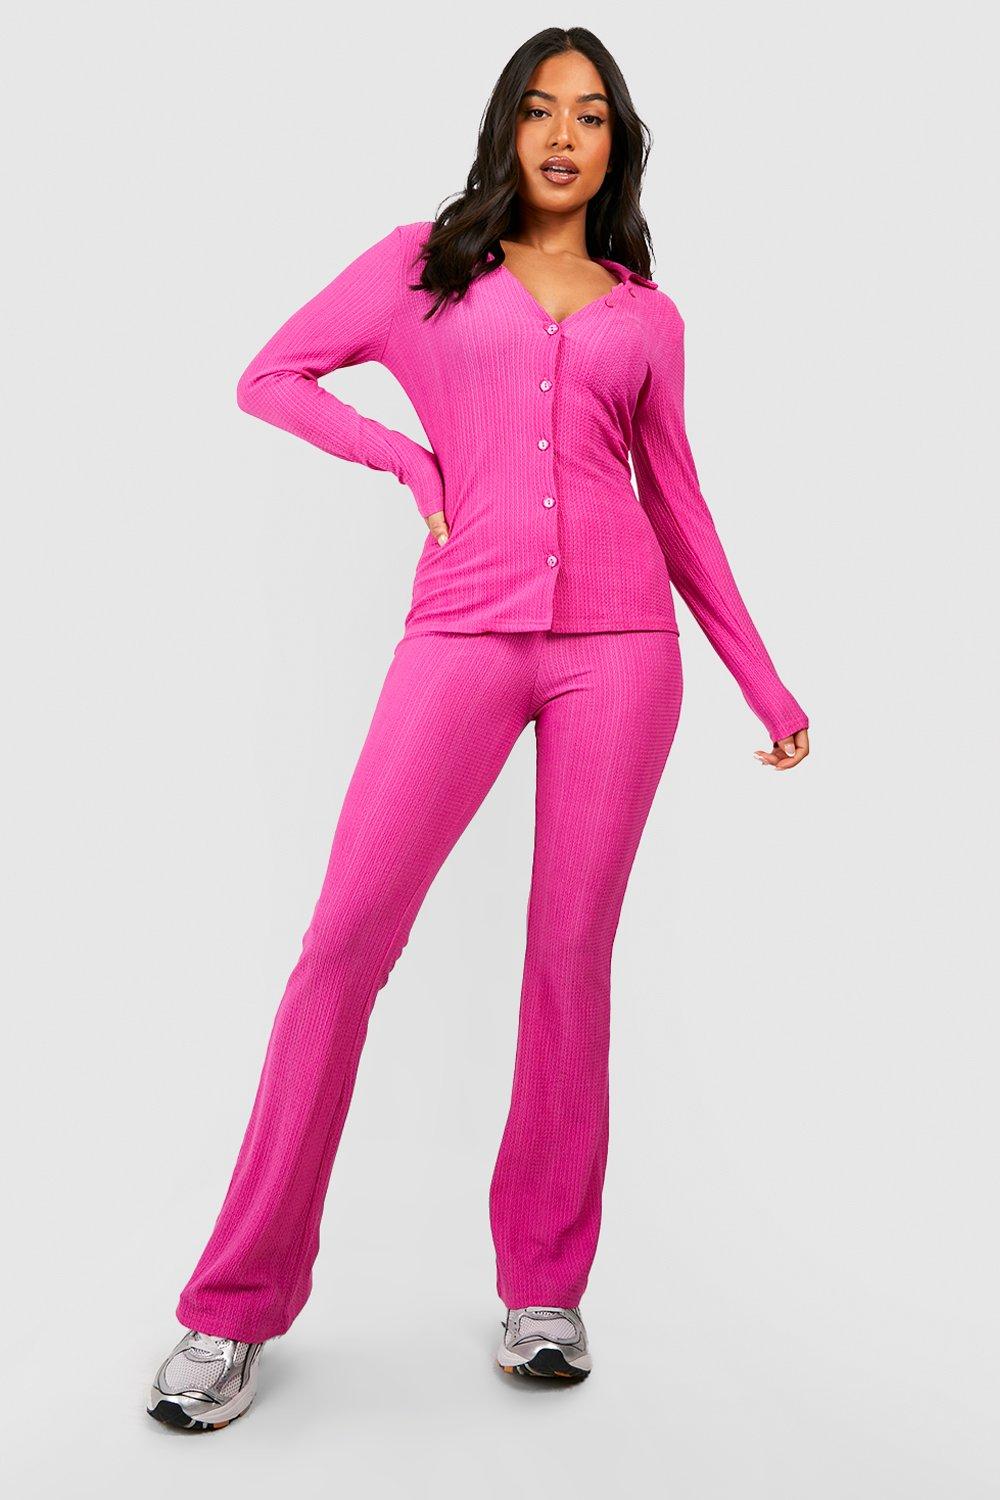 Buy Victoria's Secret PINK Ribbed Flare Legging from the